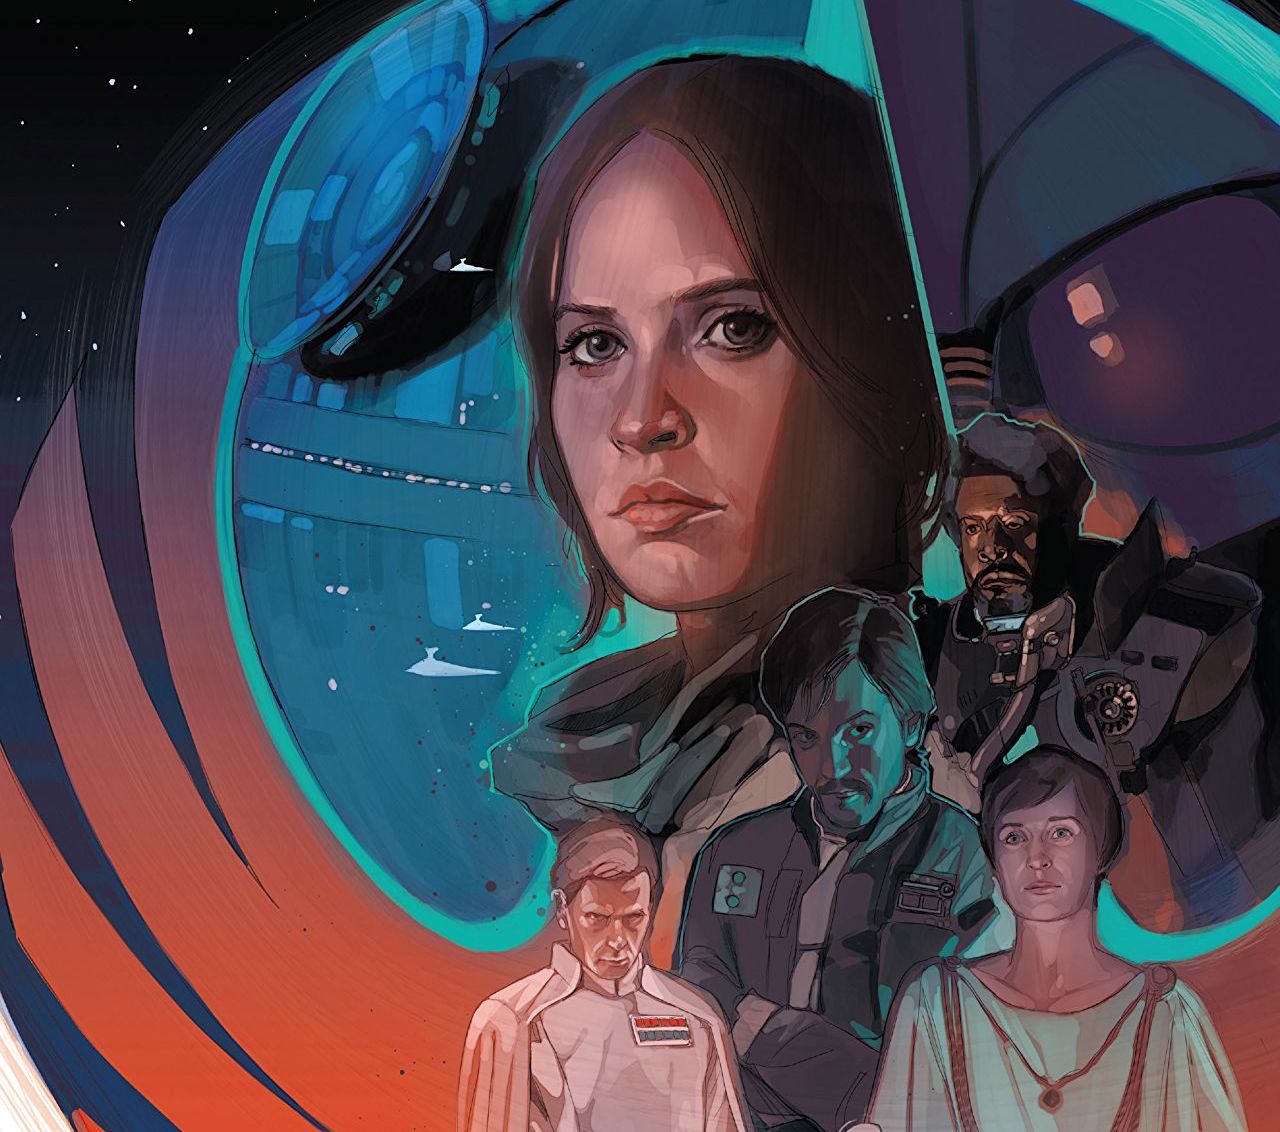 'Star Wars: Rogue One Adaptation' hardcover collector's edition review: A collection Star Wars fans deserve